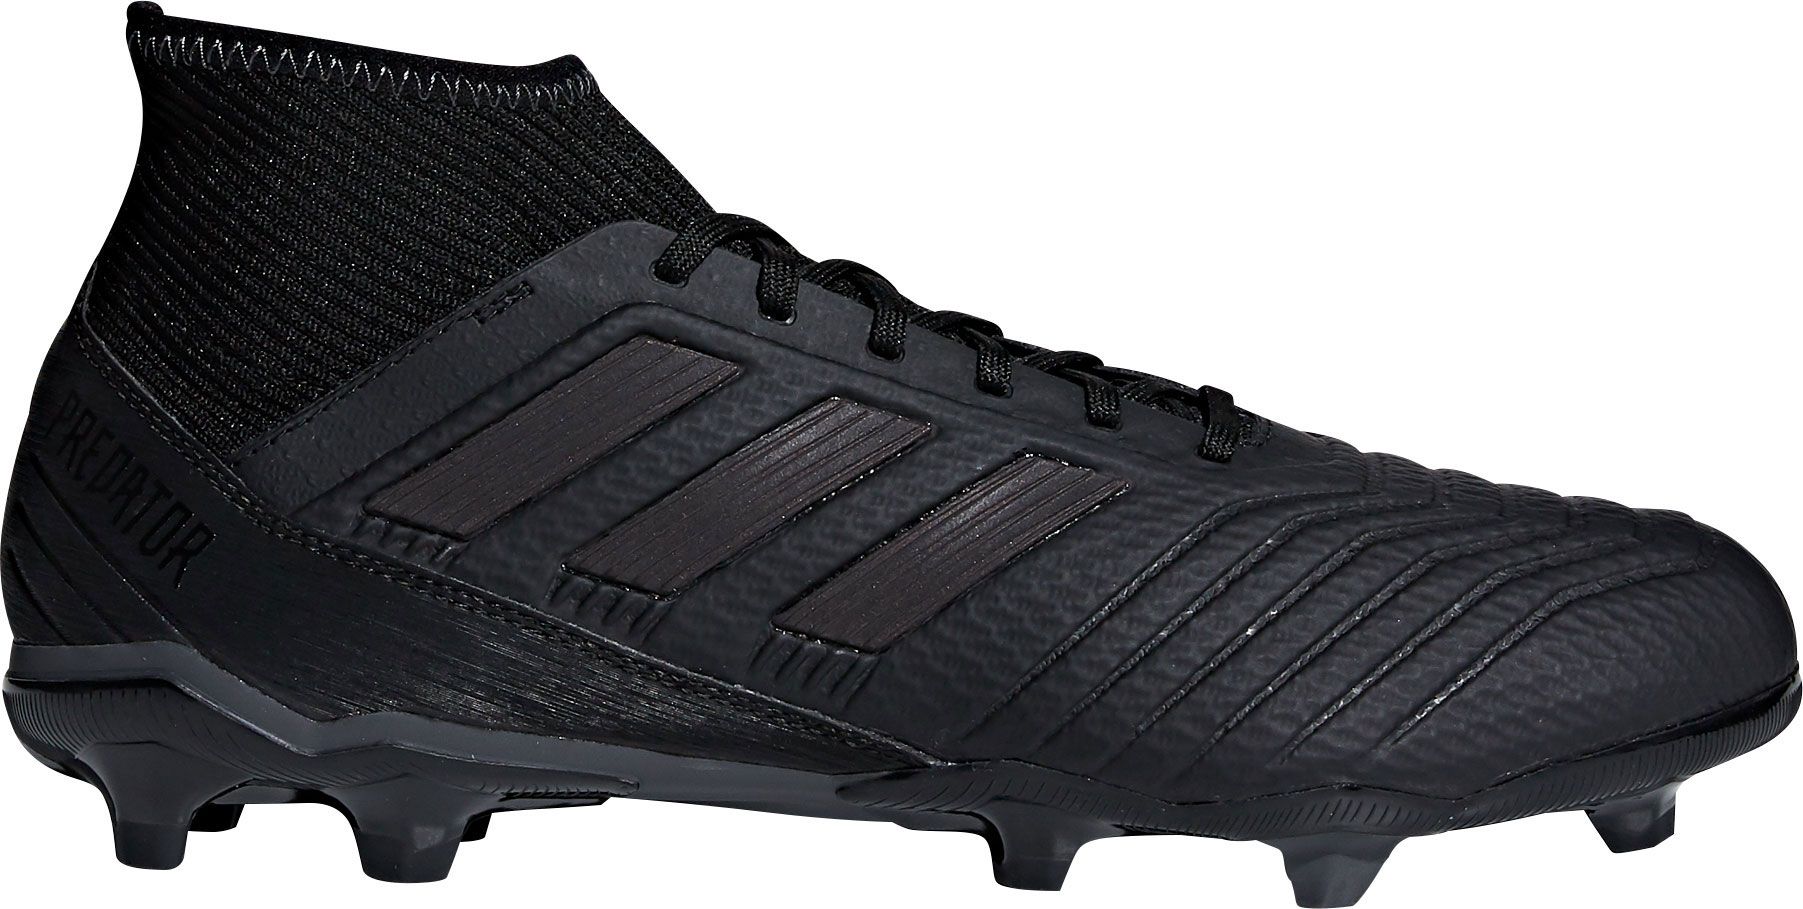 Soccer Cleats & Shoes | Best Price Guarantee at DICK'S